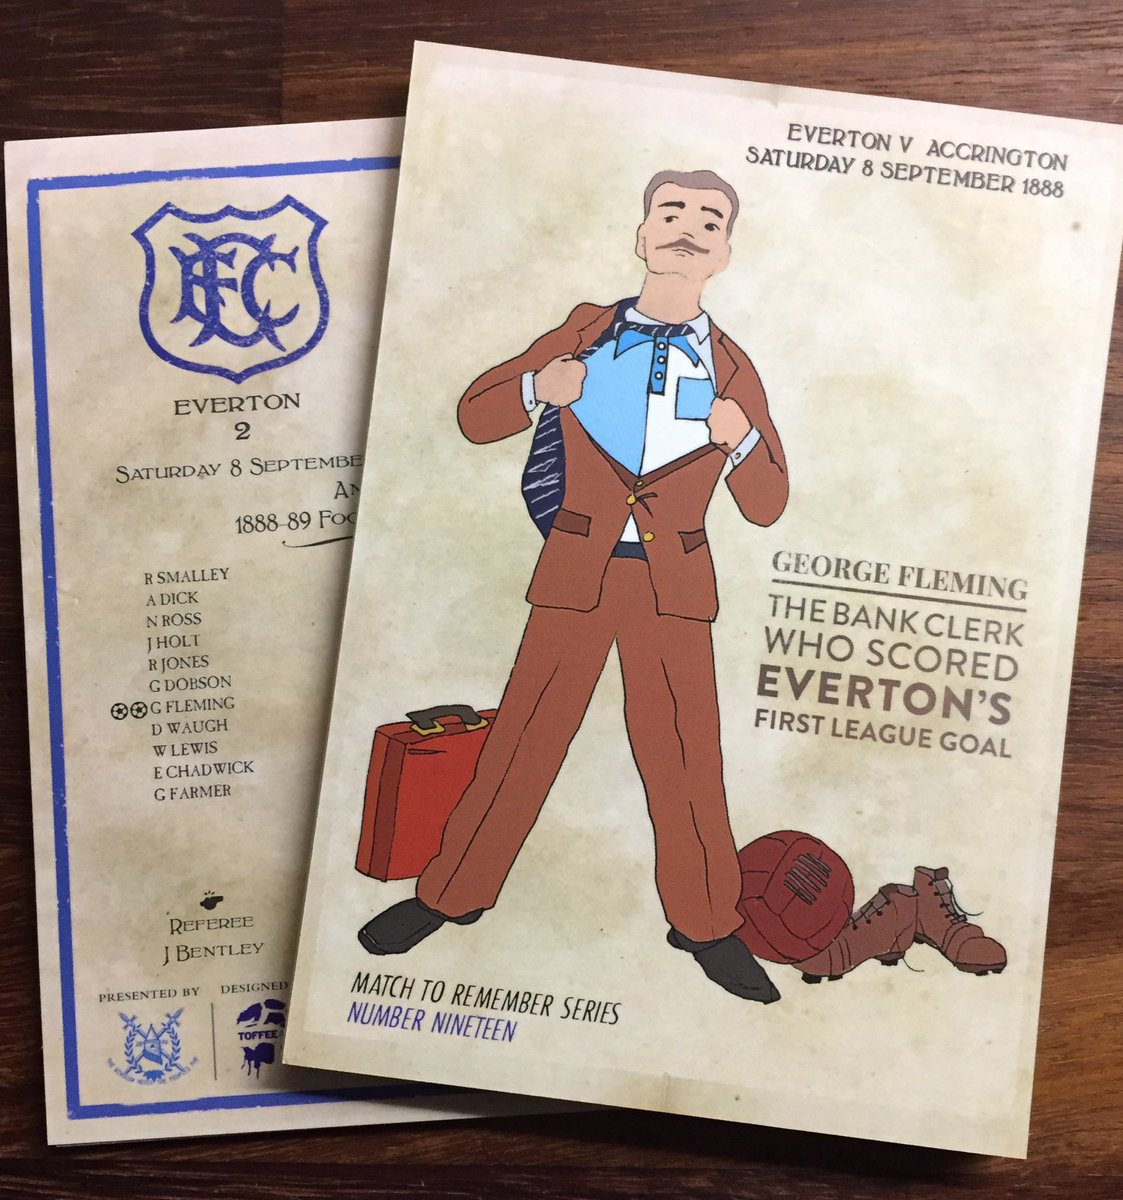 Pop along to St Luke’s tomorrow and pick up the next postcard celebrating George Fleming in our Match To Remember series. It’s free before the game so if you’ve been collecting them don’t miss out! #efc #EVEWOL #EFCMatchday